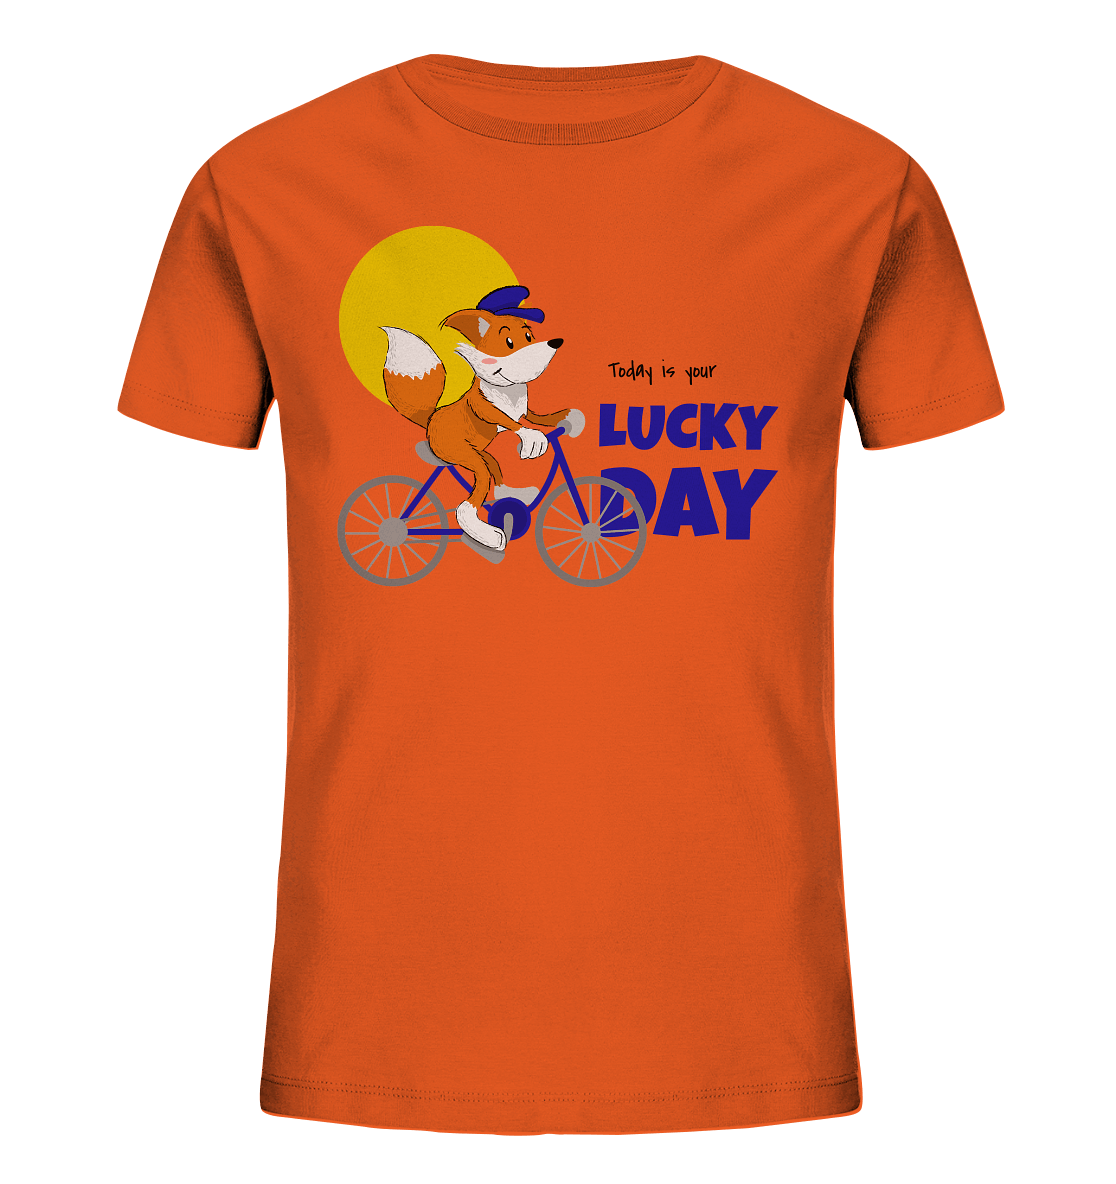 Kinder T-Shirt "Today is your lucky Day"